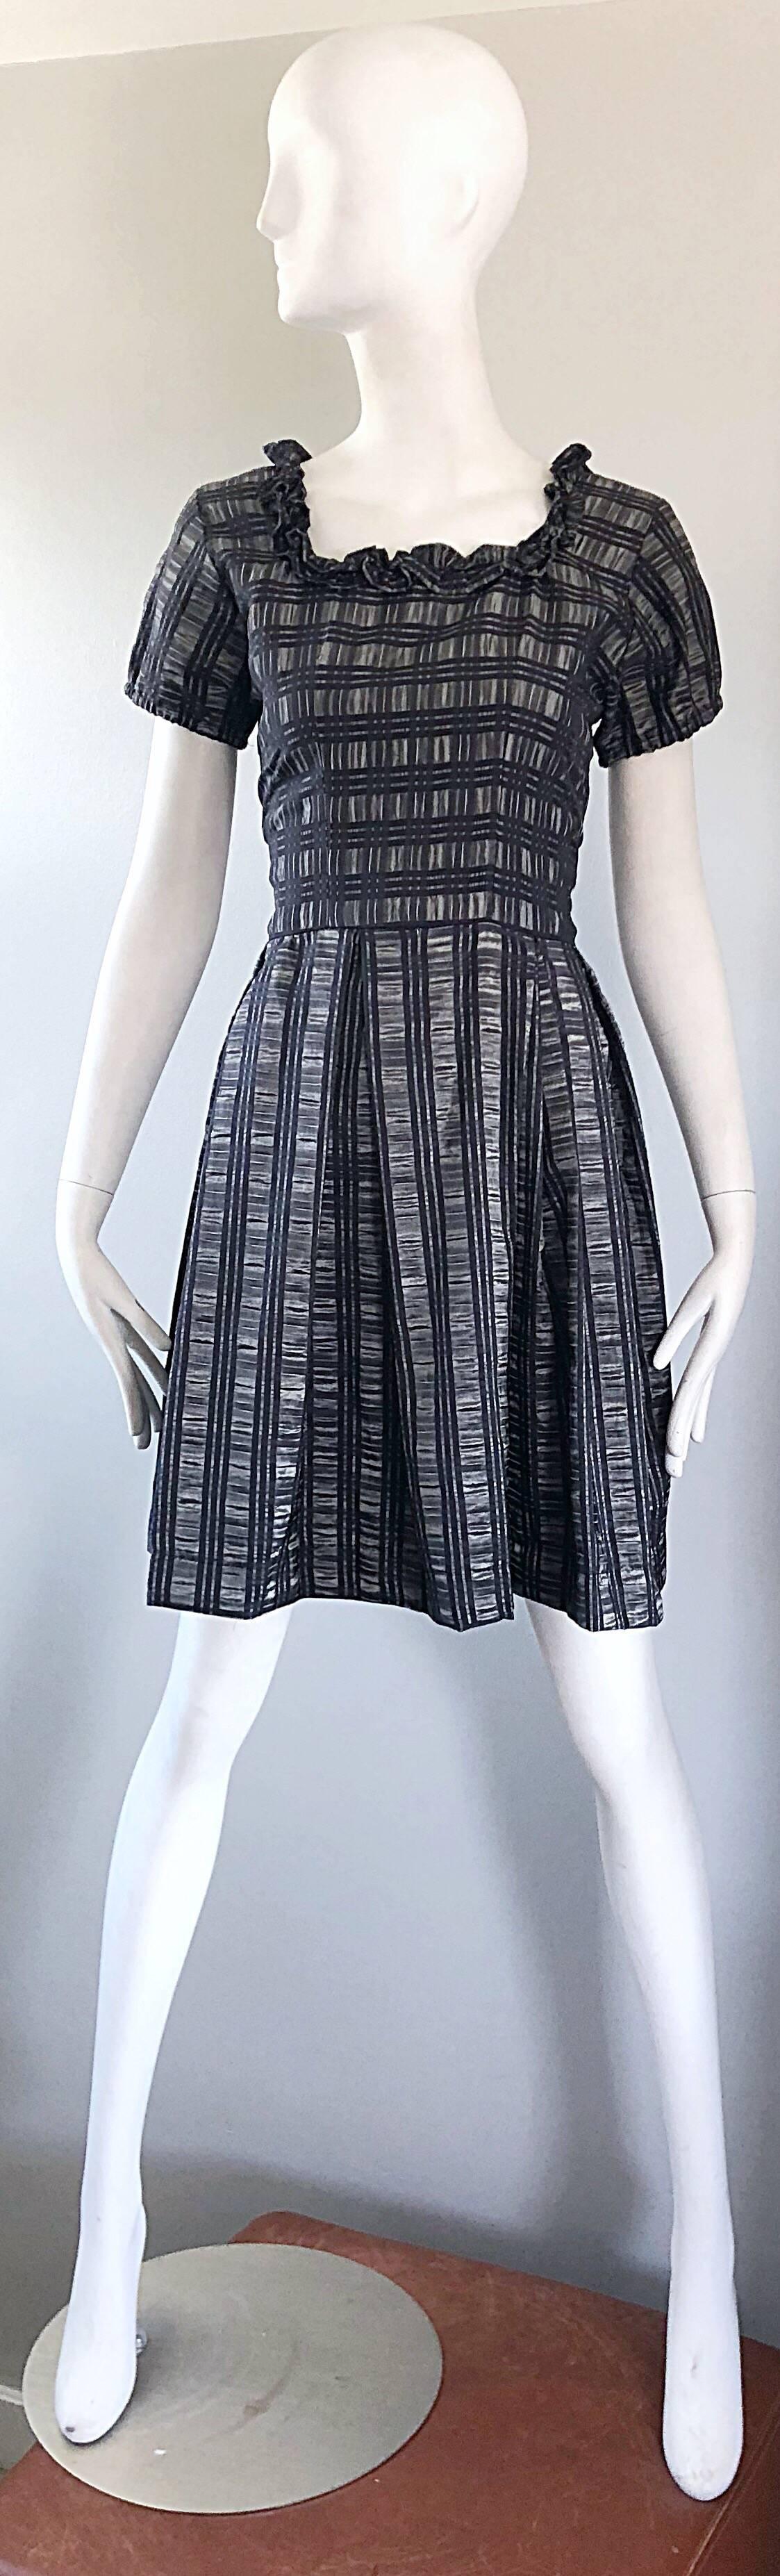 Pretty 1950s silk taffeta short puff sleeve dress! Features a grey metallic backdrop with black plaid printed throughout. Fitted tailored bodice with ruffles along the neckline. Chic puff sleeves feature elastic cuffs. Full forgiving skirt can also